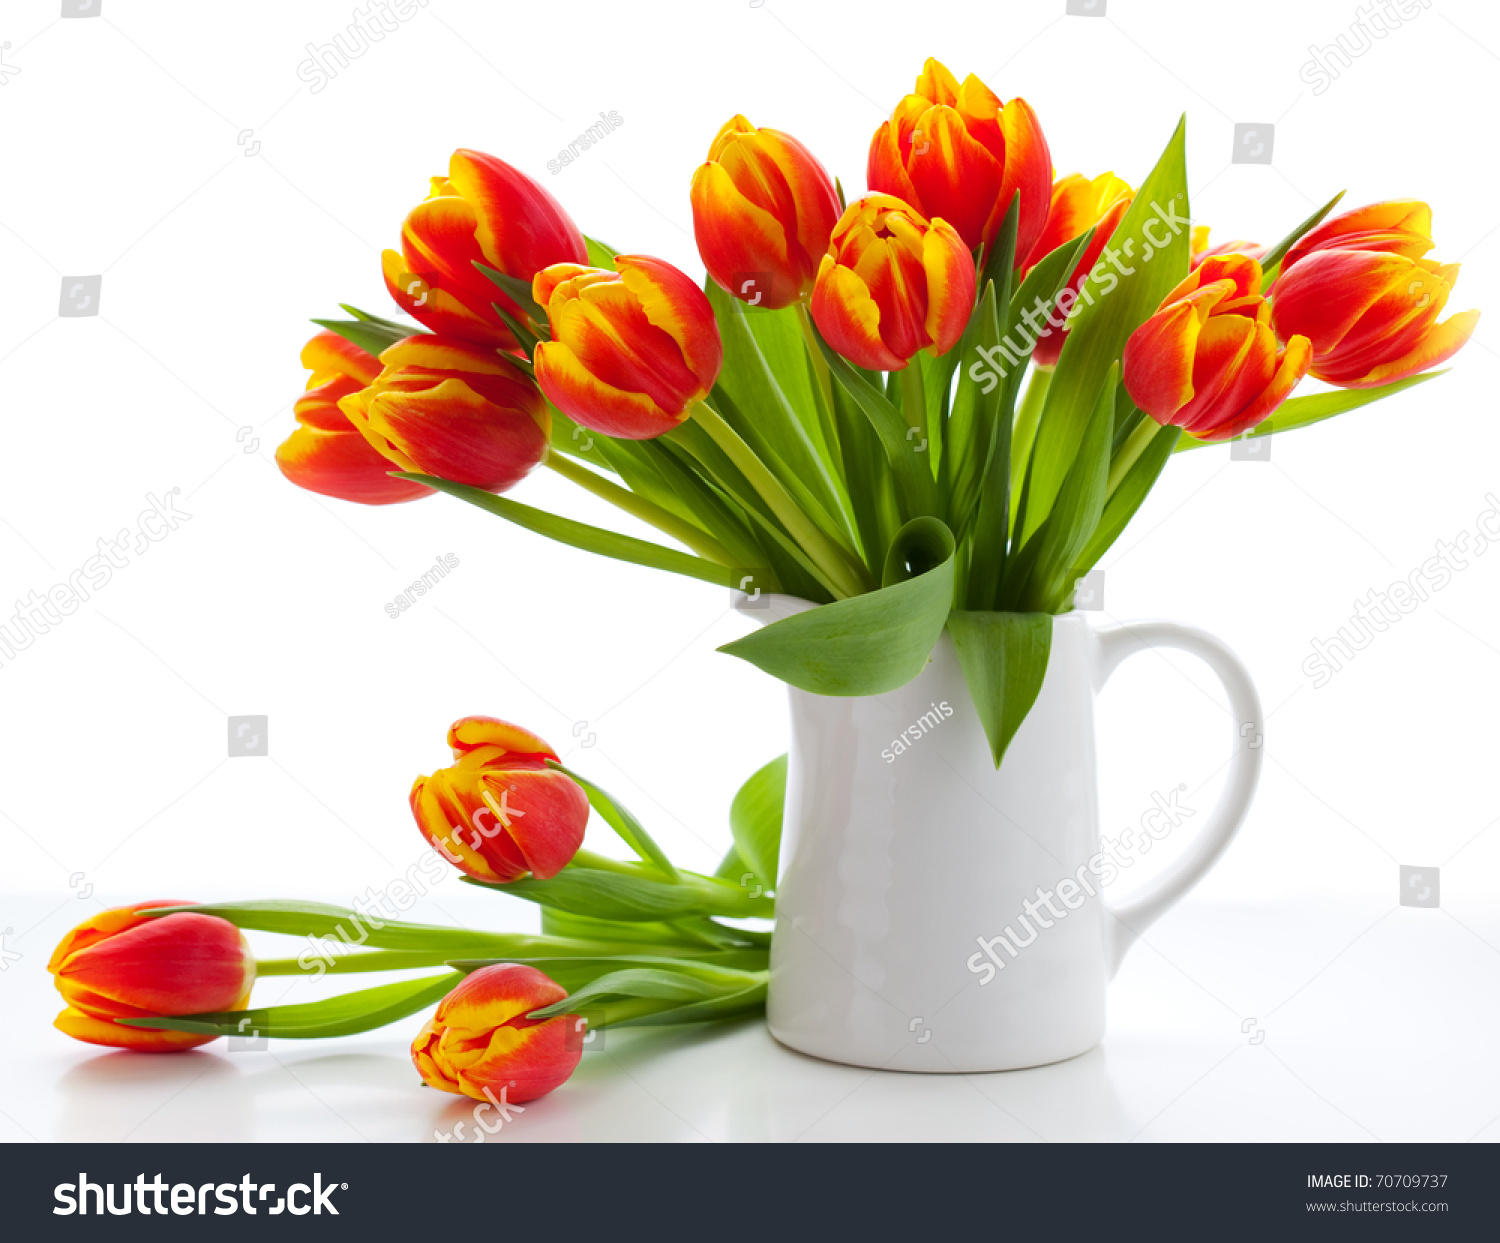 Red Tulips Jug On White Background Stock Photo 70709737 - Shutterstock